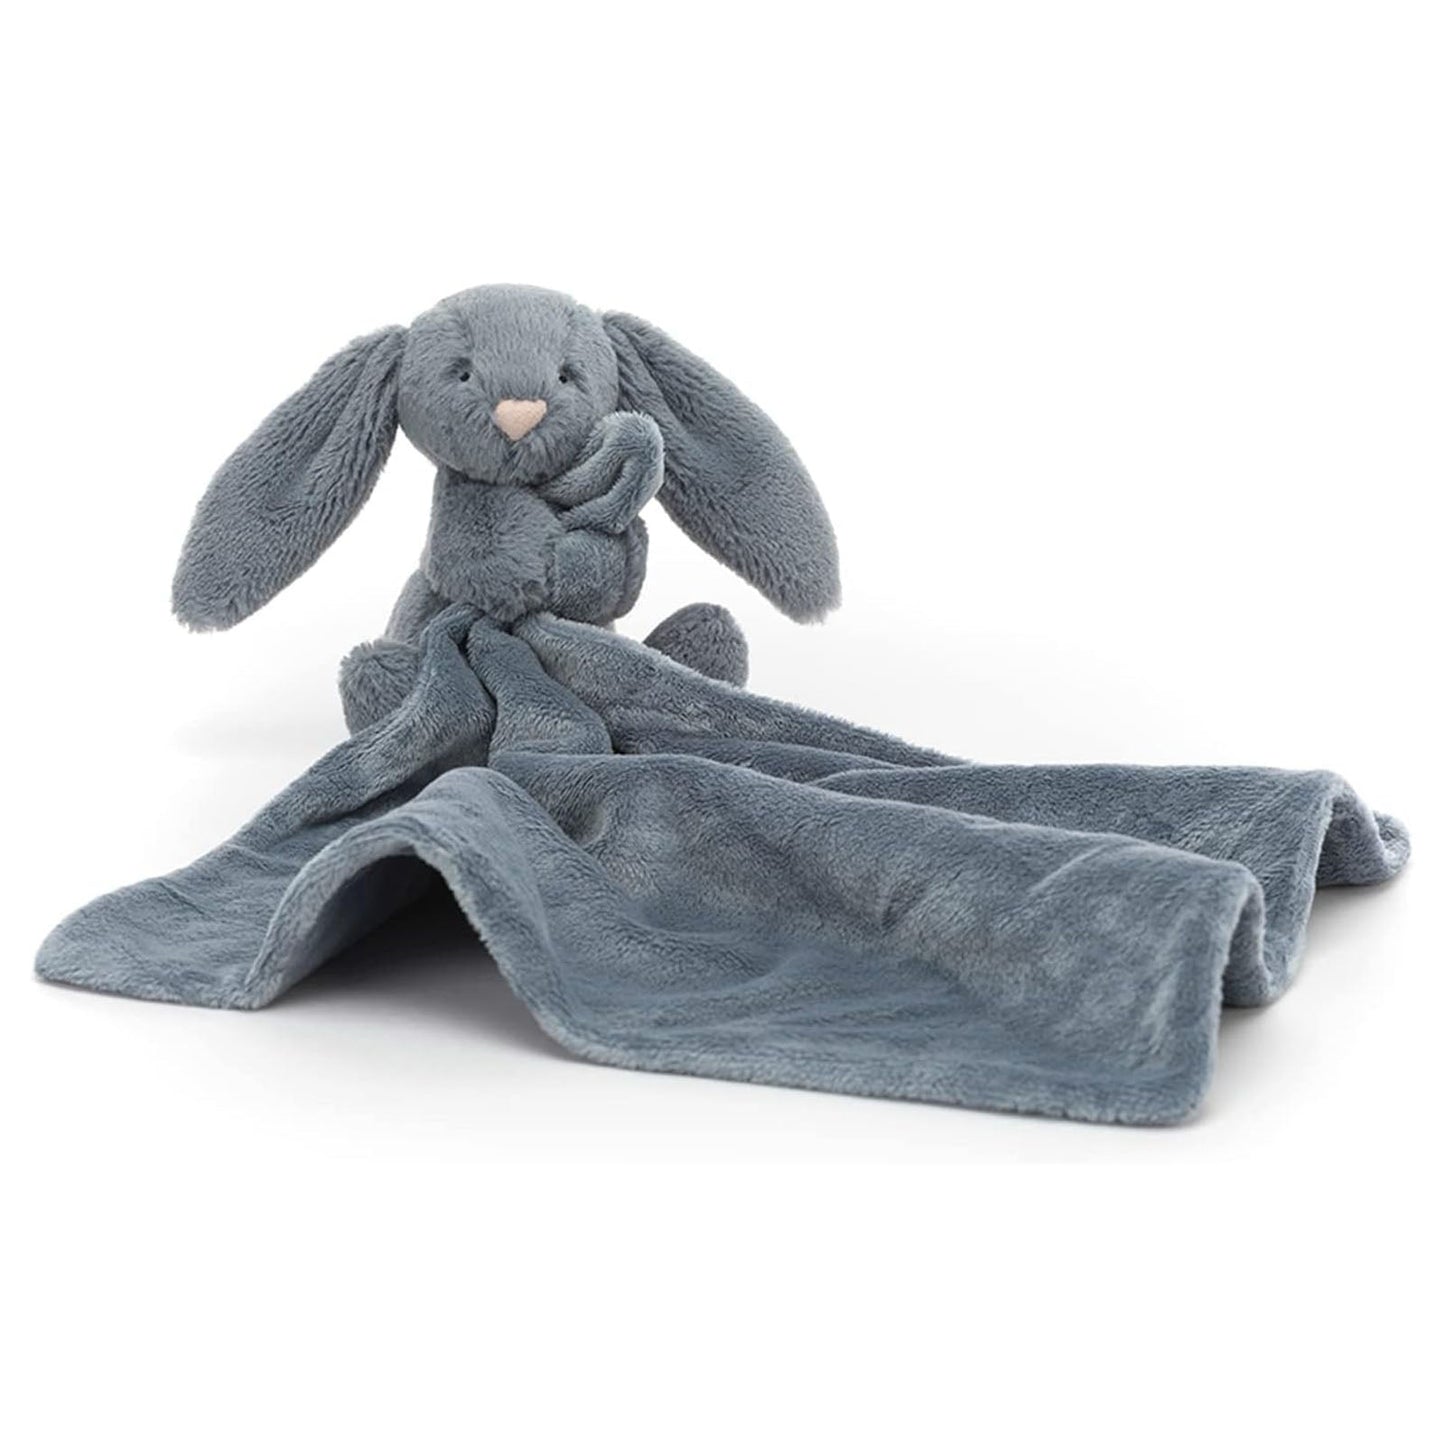 Jellycat Bunny Dusky Blue Soother 6 Inch Plush Figure